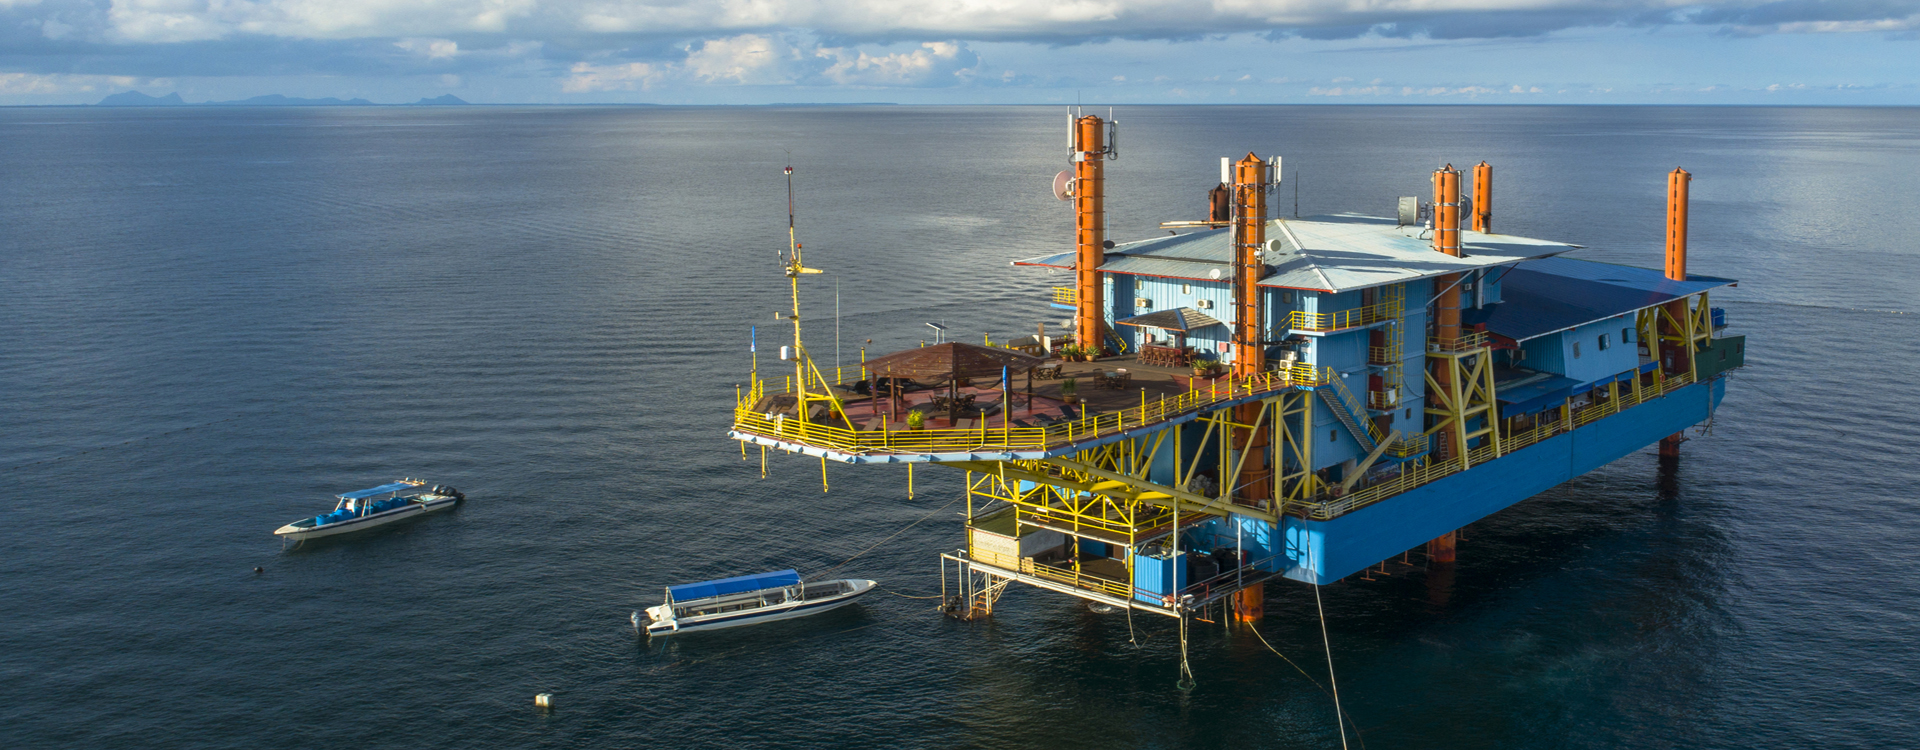 Overview of Seaventures Dive Rig, a dive platform and diving resort based near Sipadan, Borneo, Malaysia